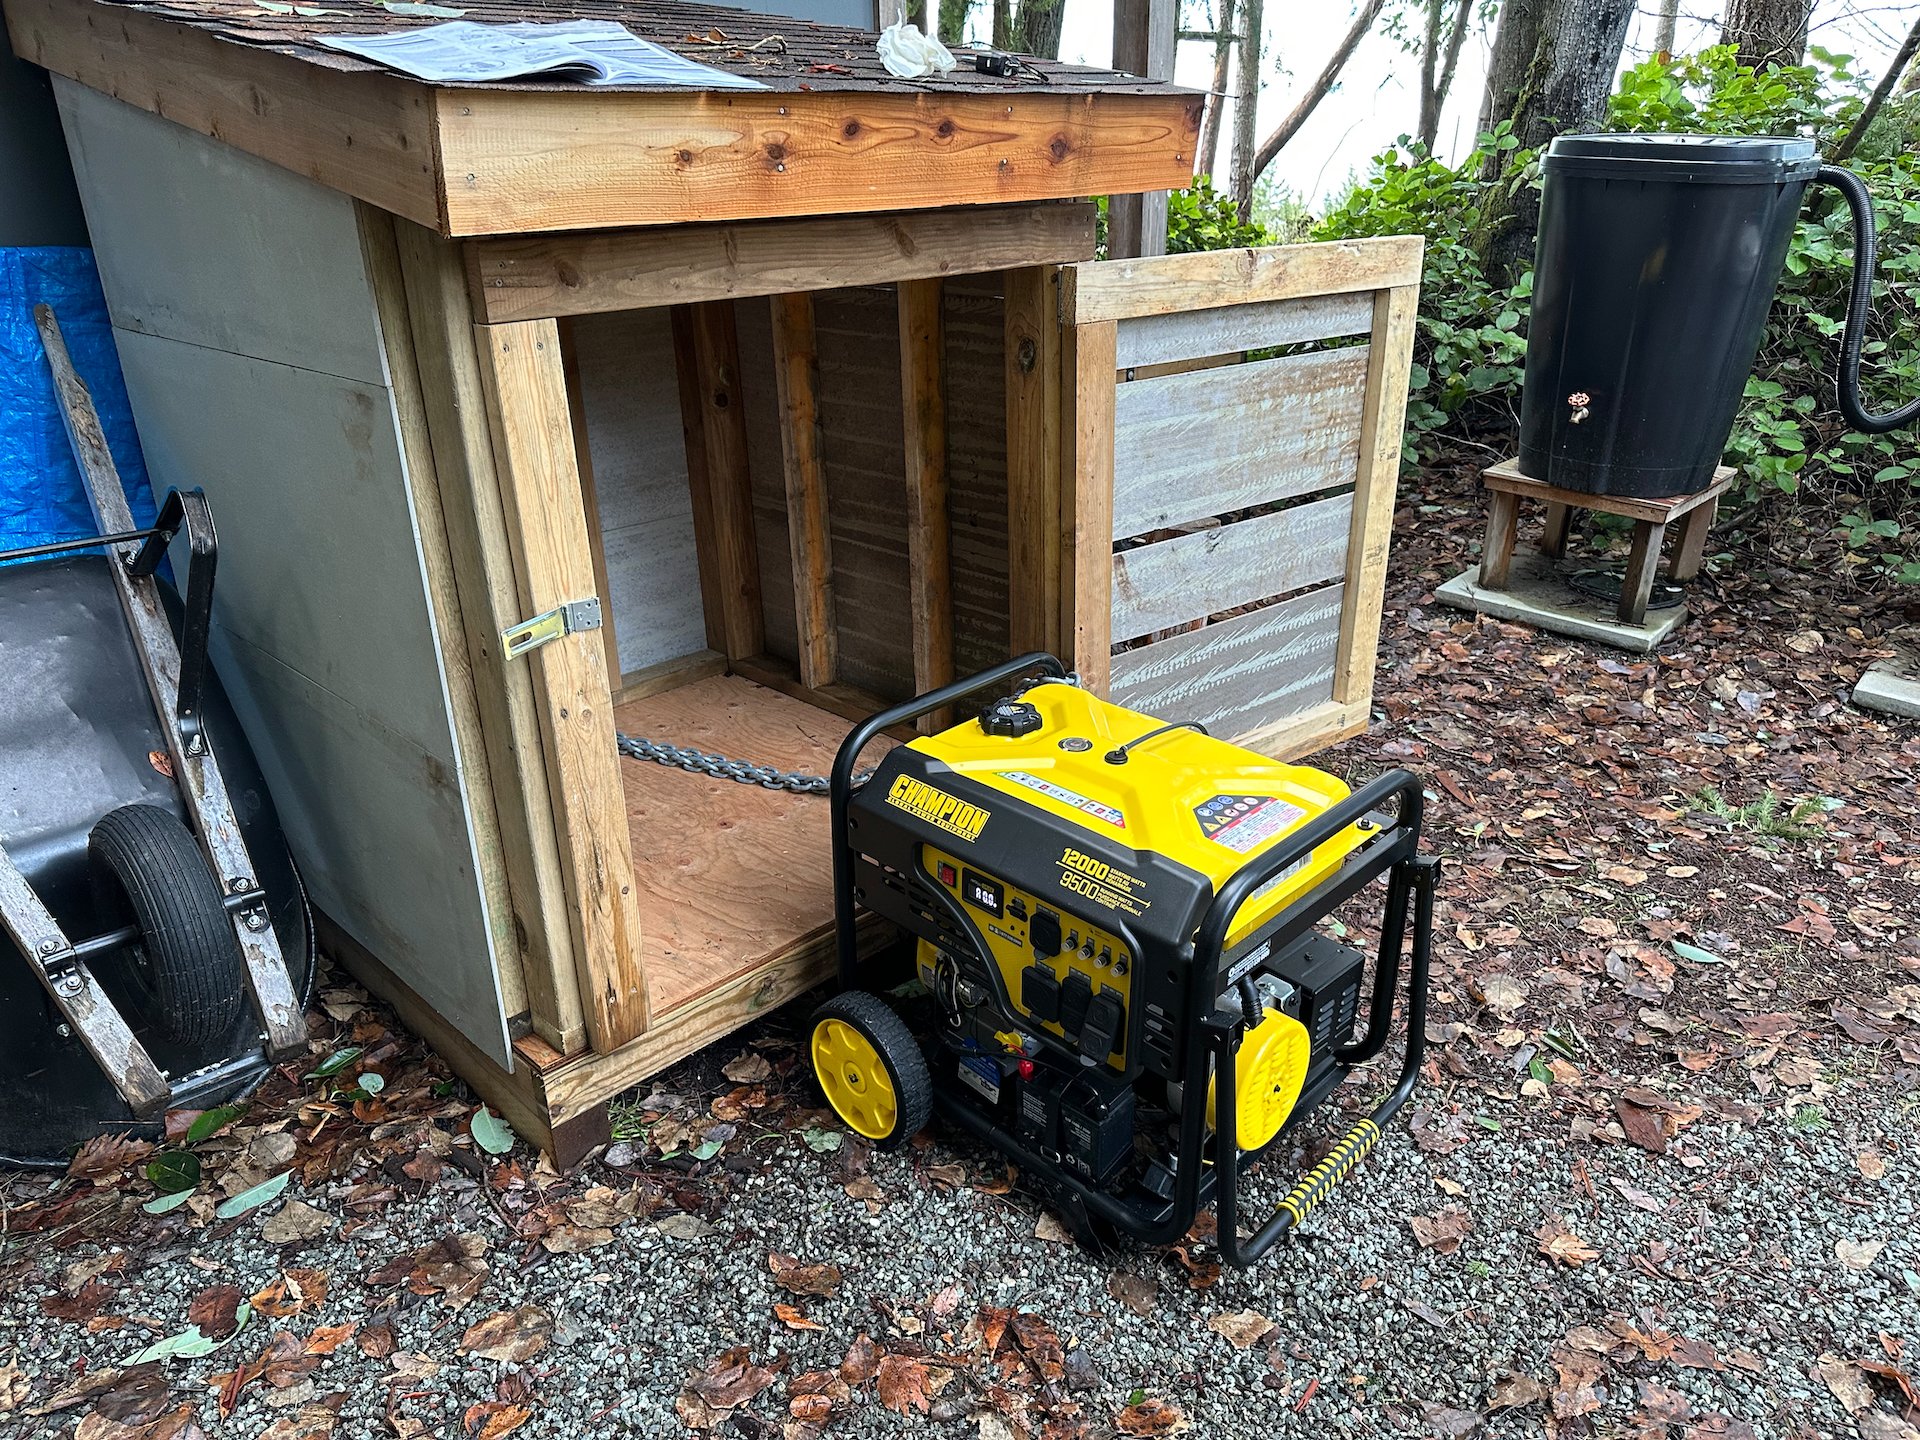  One of our first projects was to fire up the generator to test it out and start to work through it;s break in period. The electric start is nice, and it fired up straight away.  